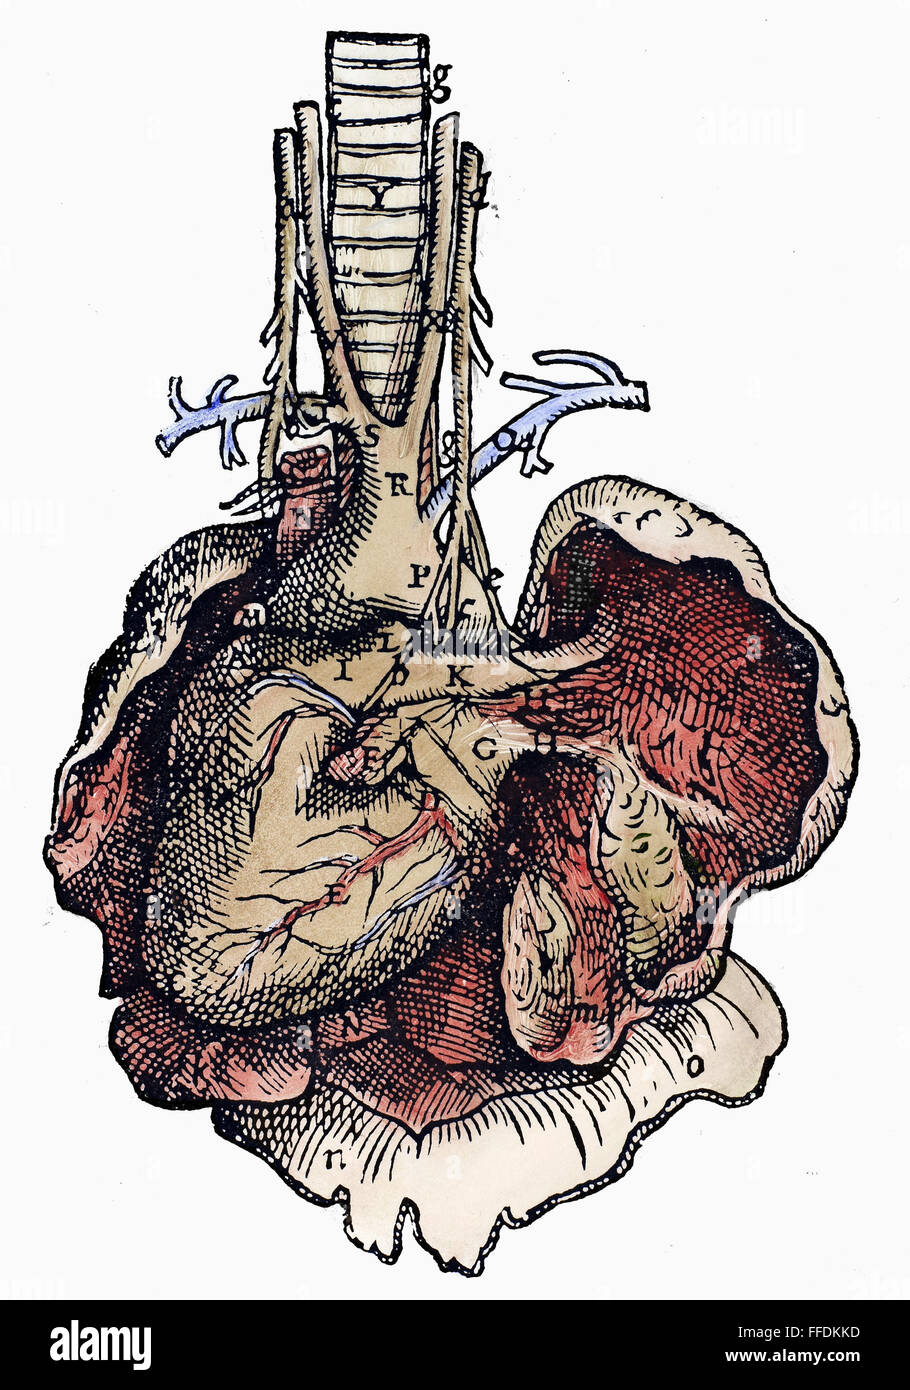 HUMAN HEART, 1543. /nWoodcut from the sixth book of Andreas Vesalius' 'De Humani Corporis Fabrica,' published in 1543 at Basel, Switzerland. Stock Photo